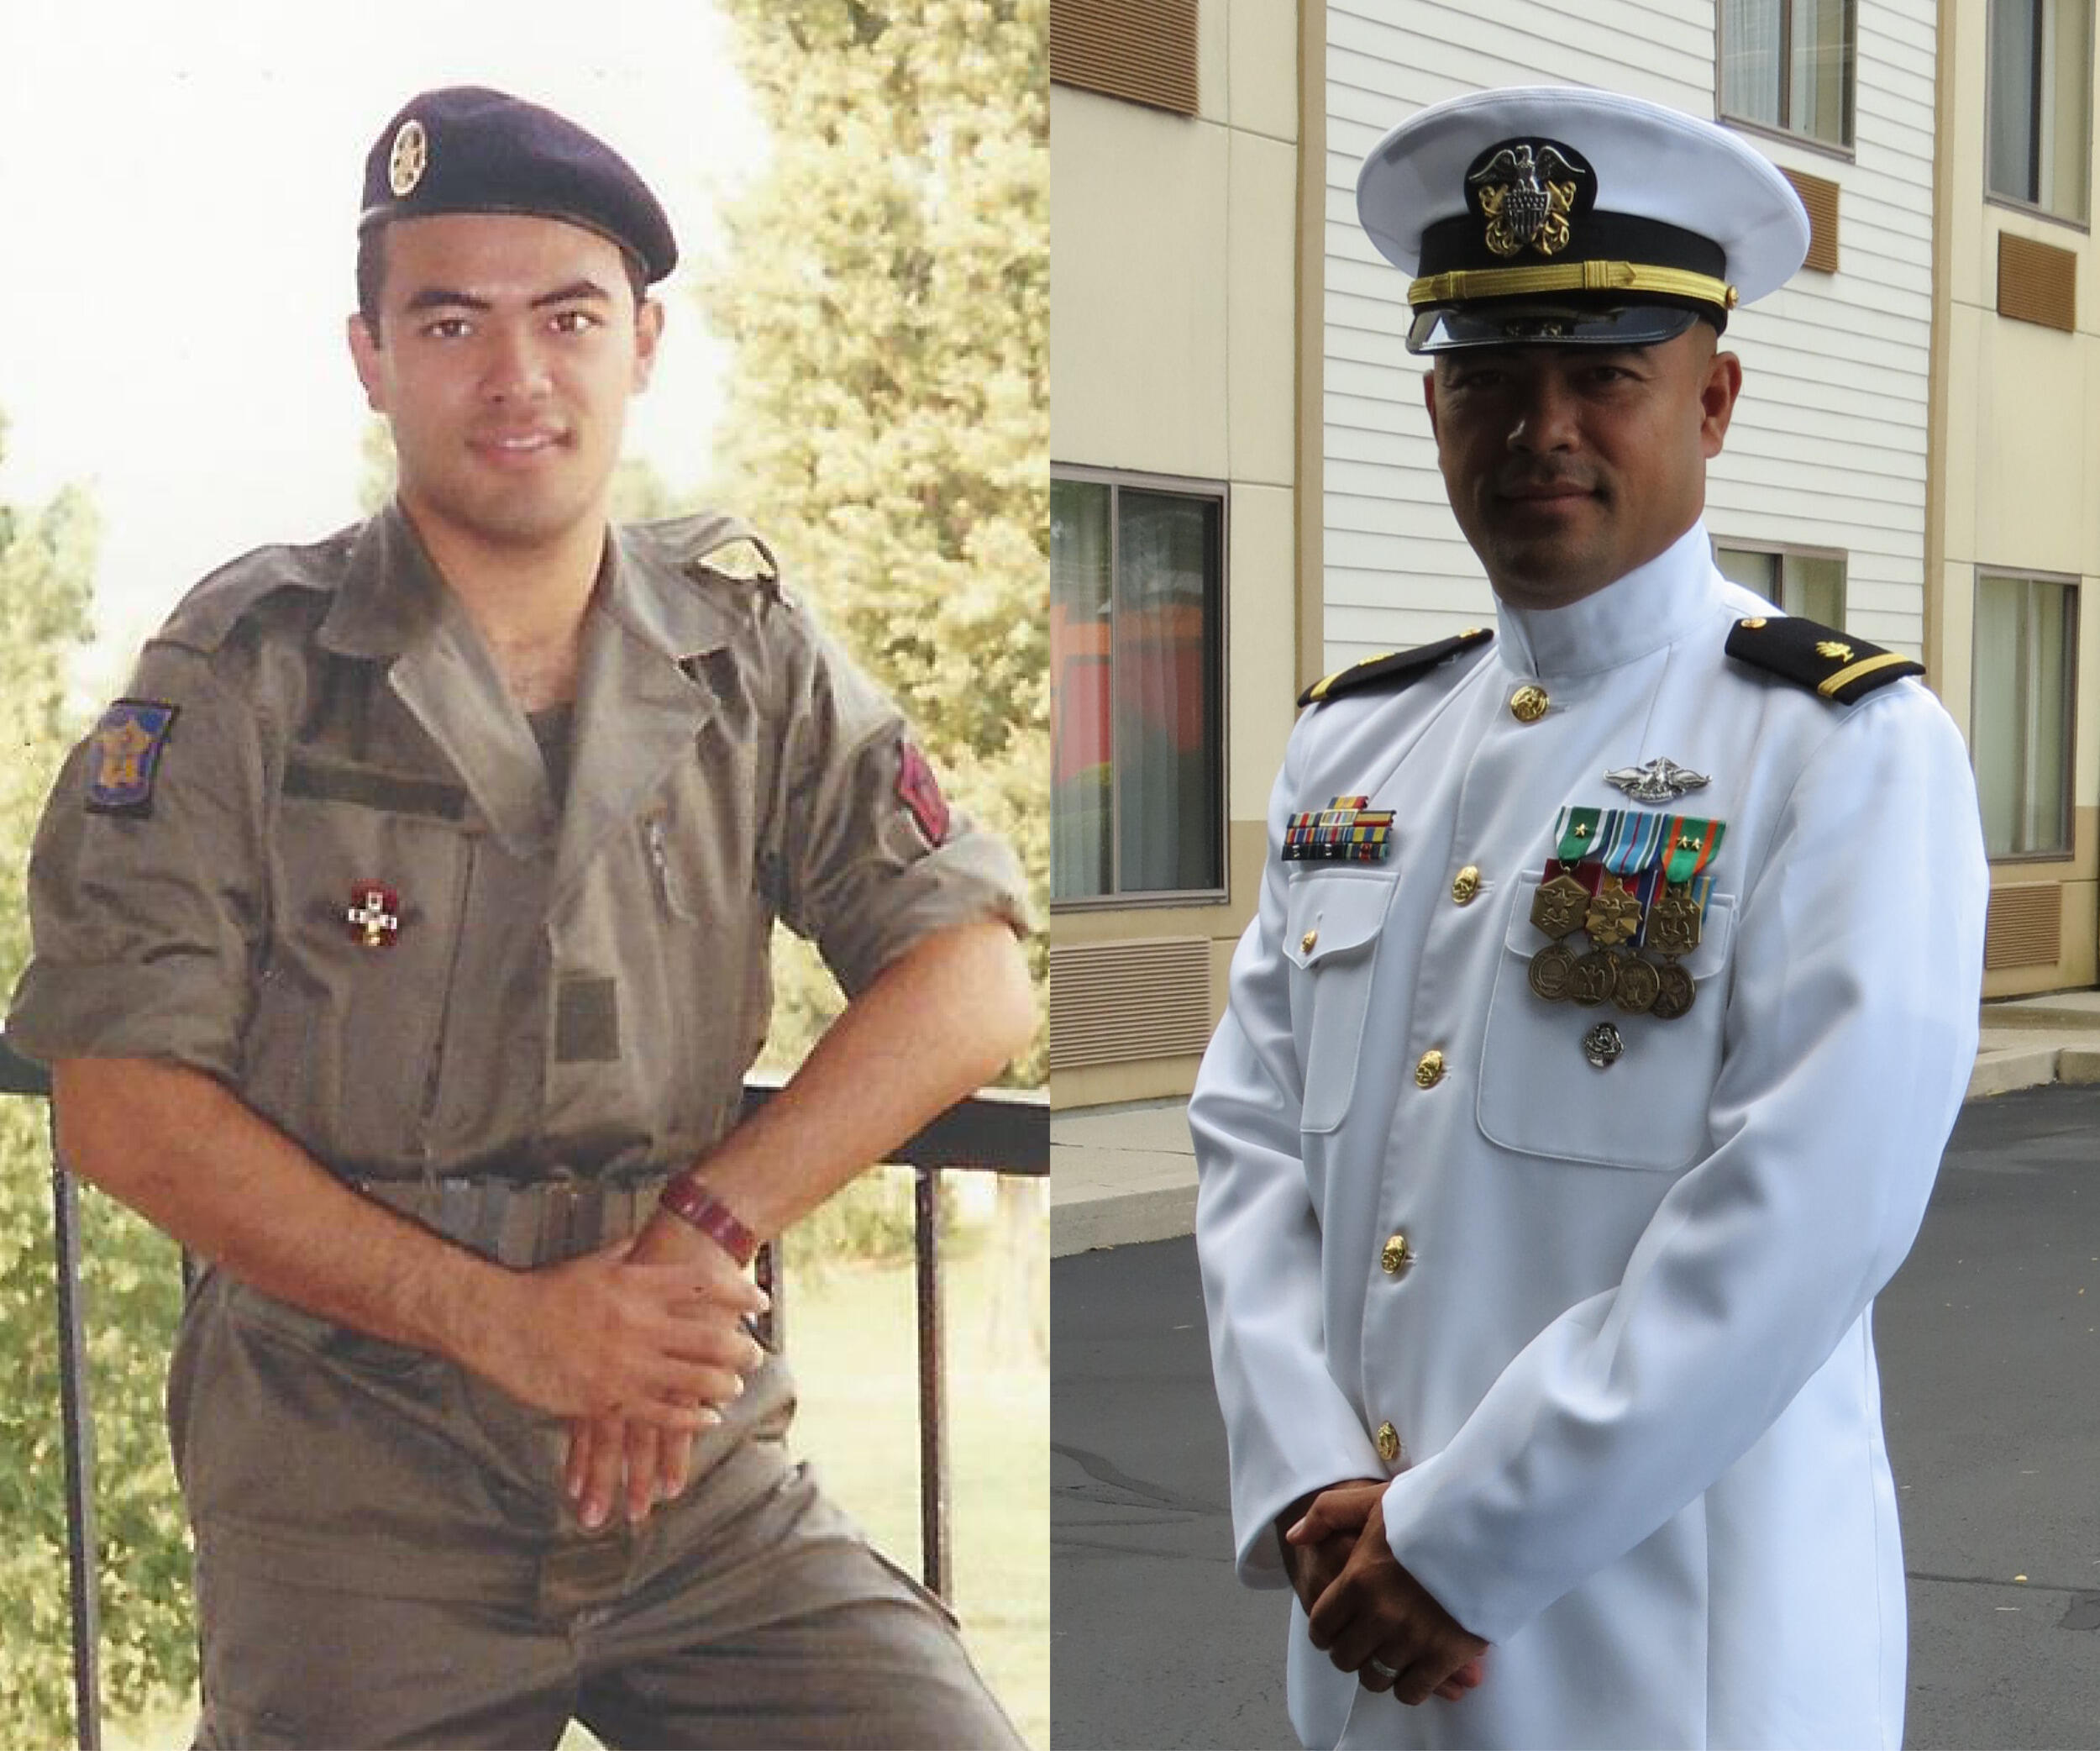 Nathan Tuoch in a French military uniform on the left and a U.S. Navy uniform on the right 